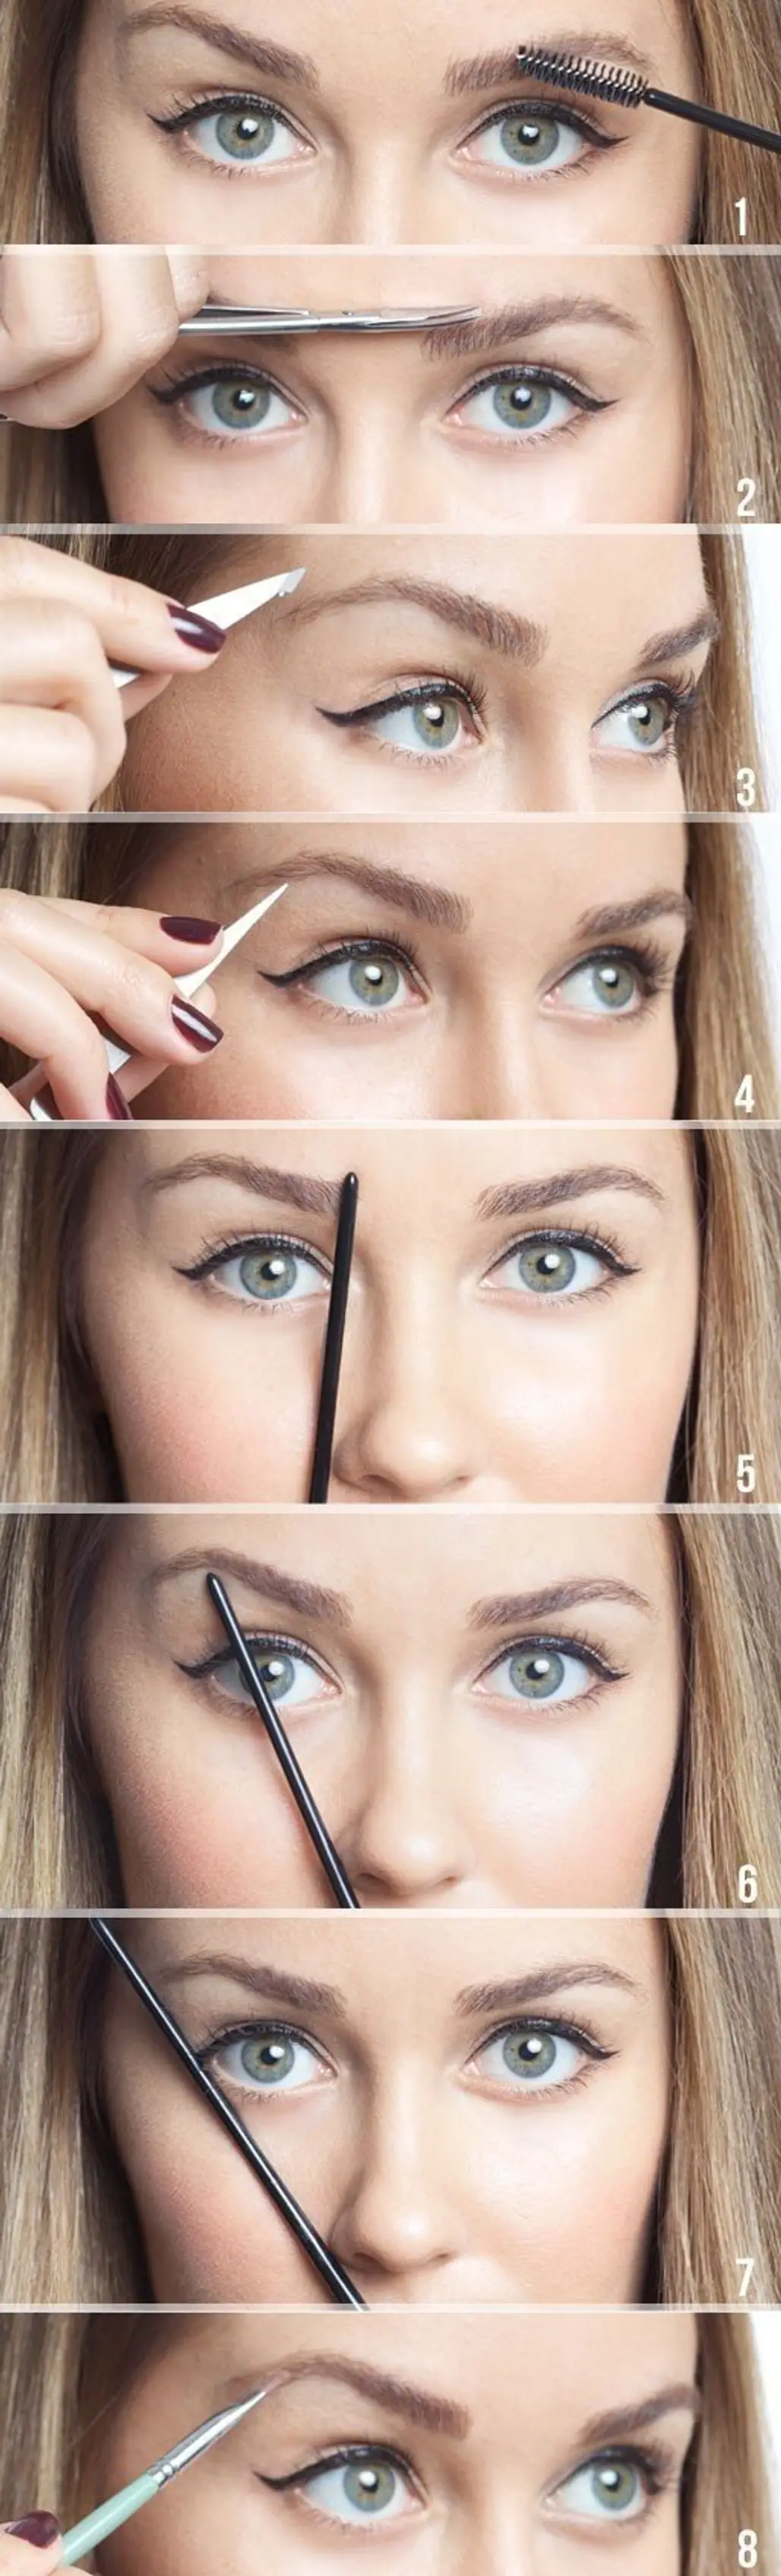 How to Shape Your Eyebrows to Fit Your Face